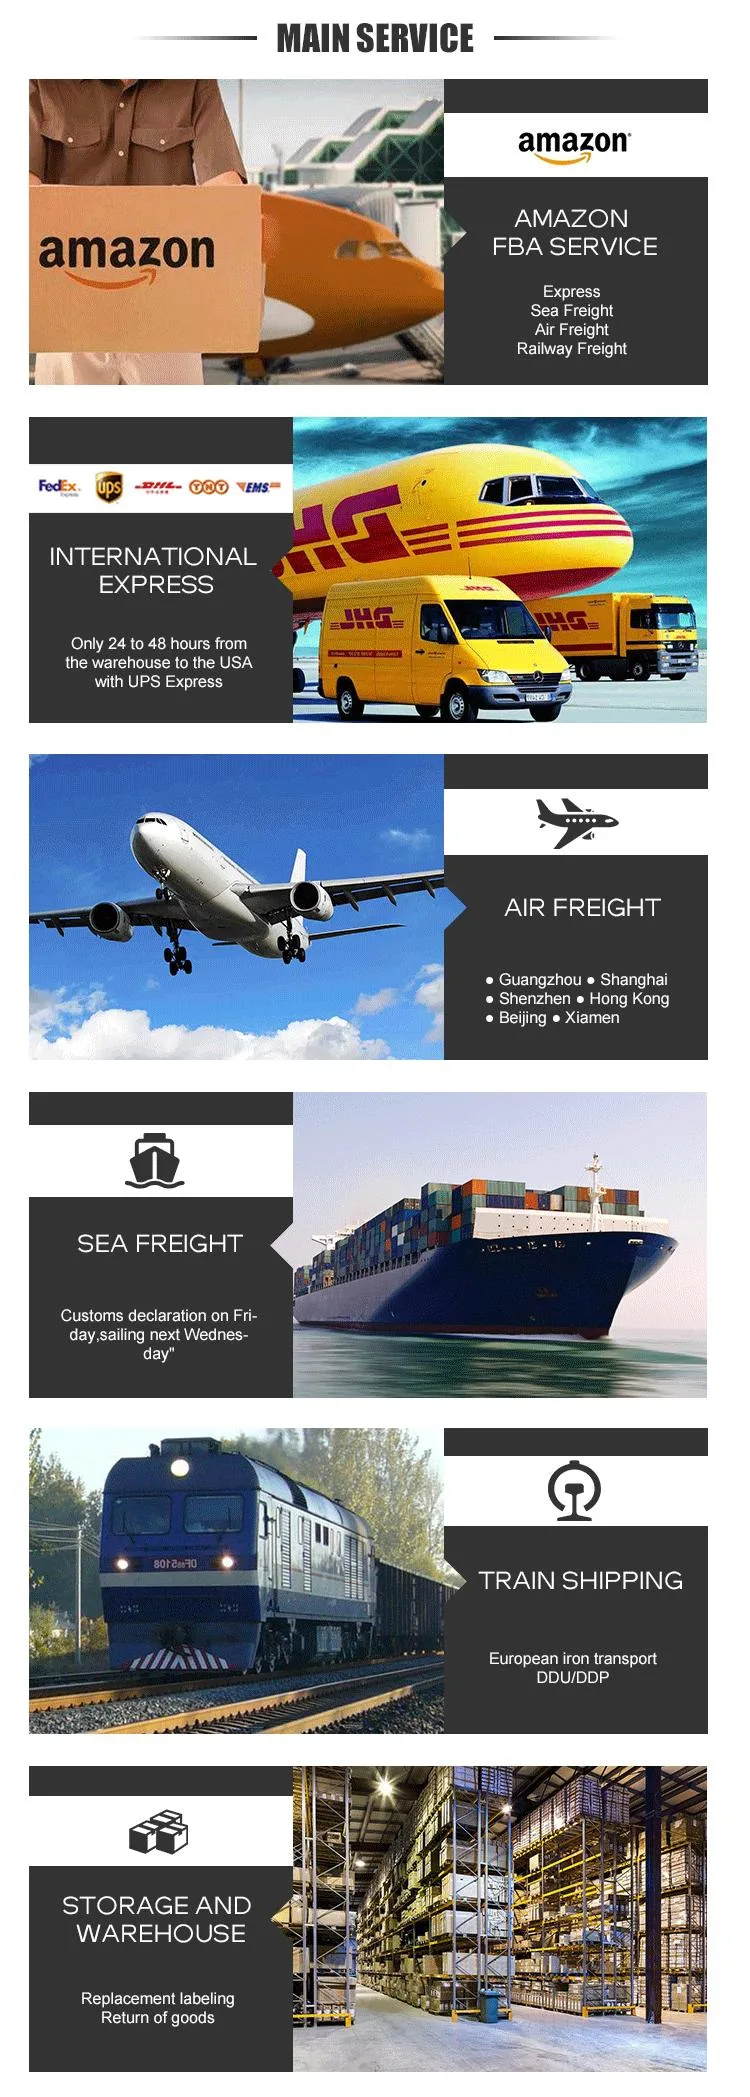 Air Cargo Logistics Company Air/Sea Drop Shipping Cost Fba From China to USA UK/Europe/Germany/Australia with Cheap Shipping Agent Price Freight Forwarder